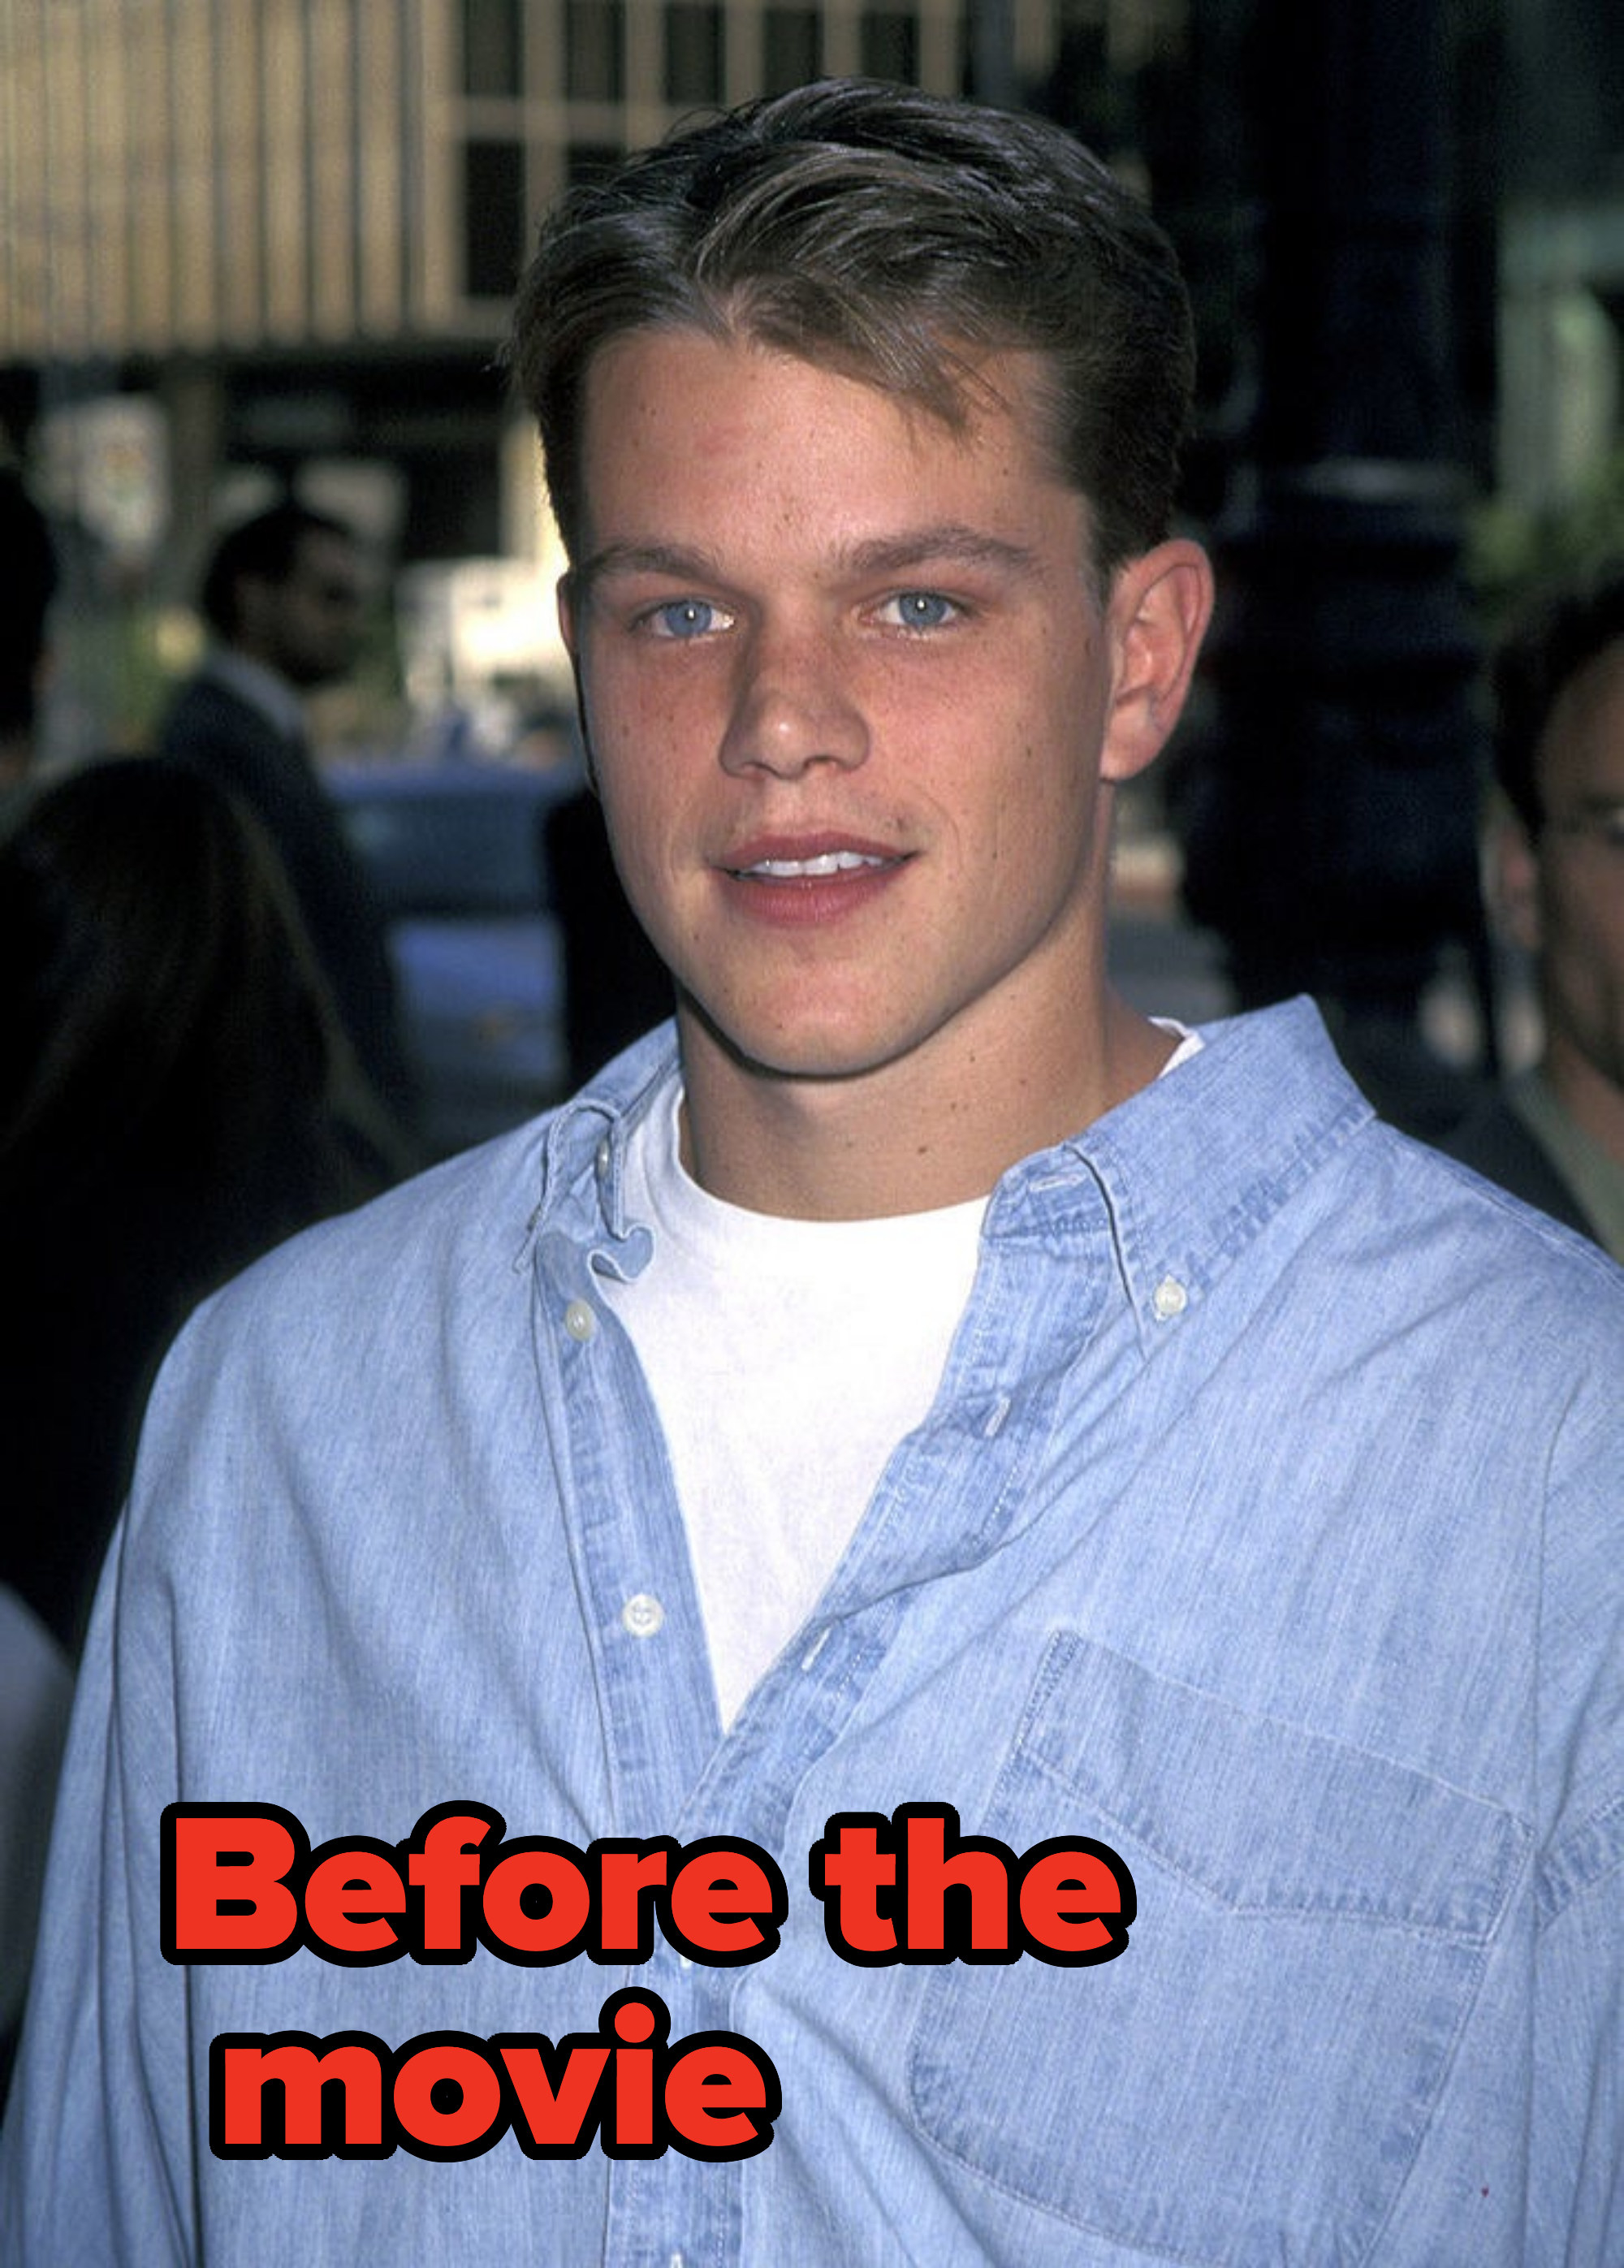 A photo of Matt Damon before filming the movie, when he looks healthy